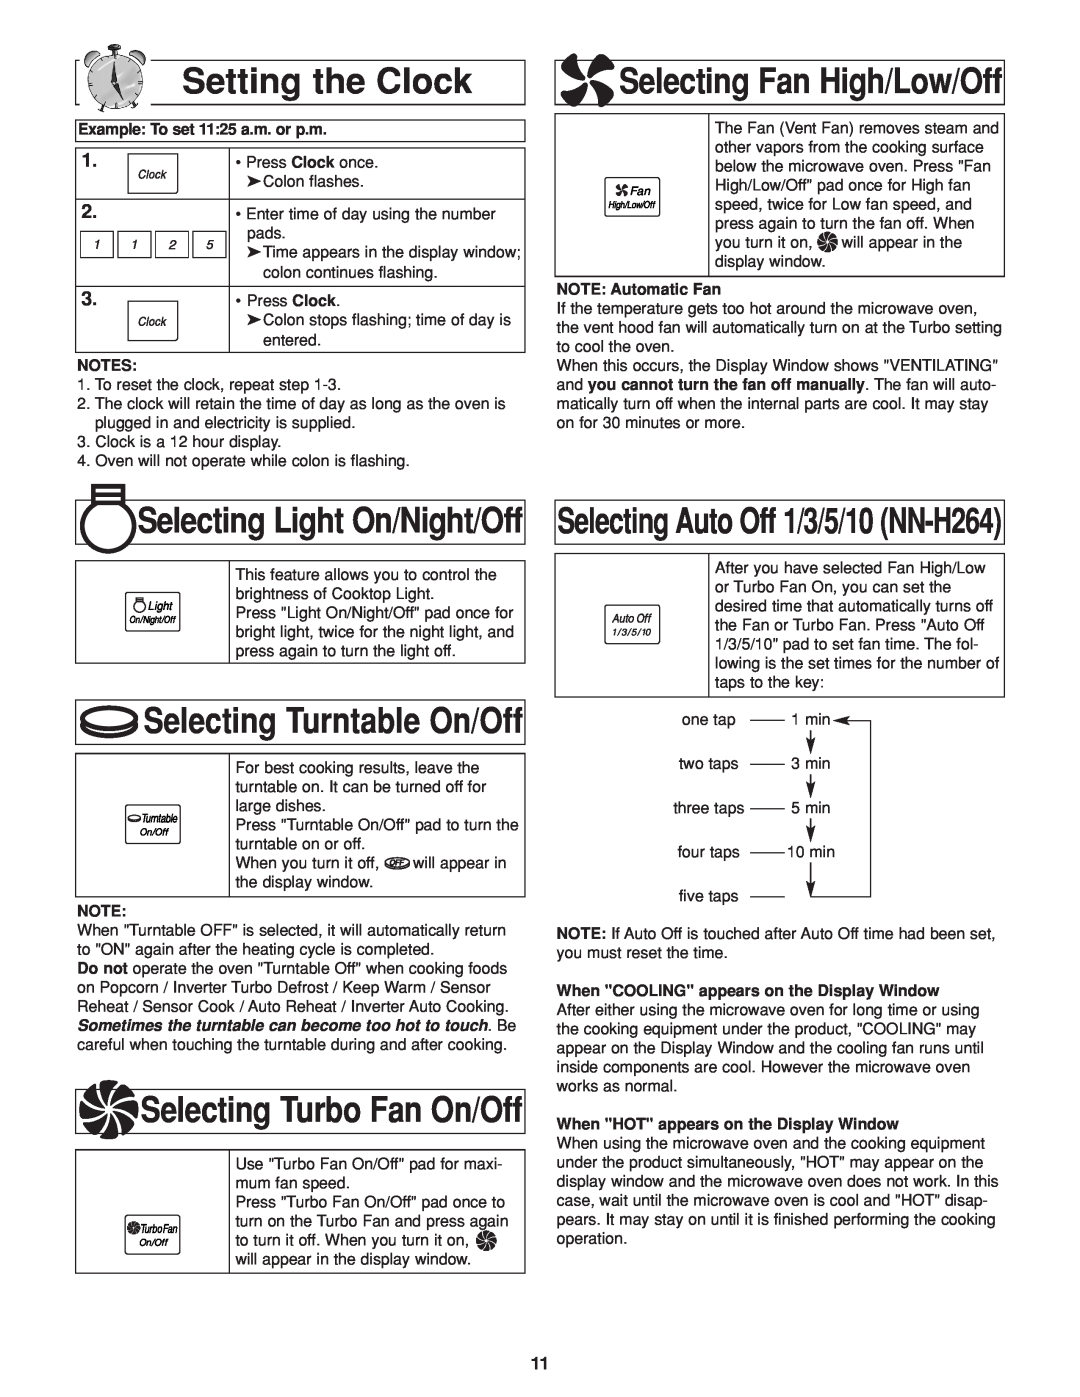 Panasonic NN-H264 Setting the Clock, Selecting Fan High/Low/Off, Selecting Turntable On/Off, Selecting Turbo Fan On/Off 